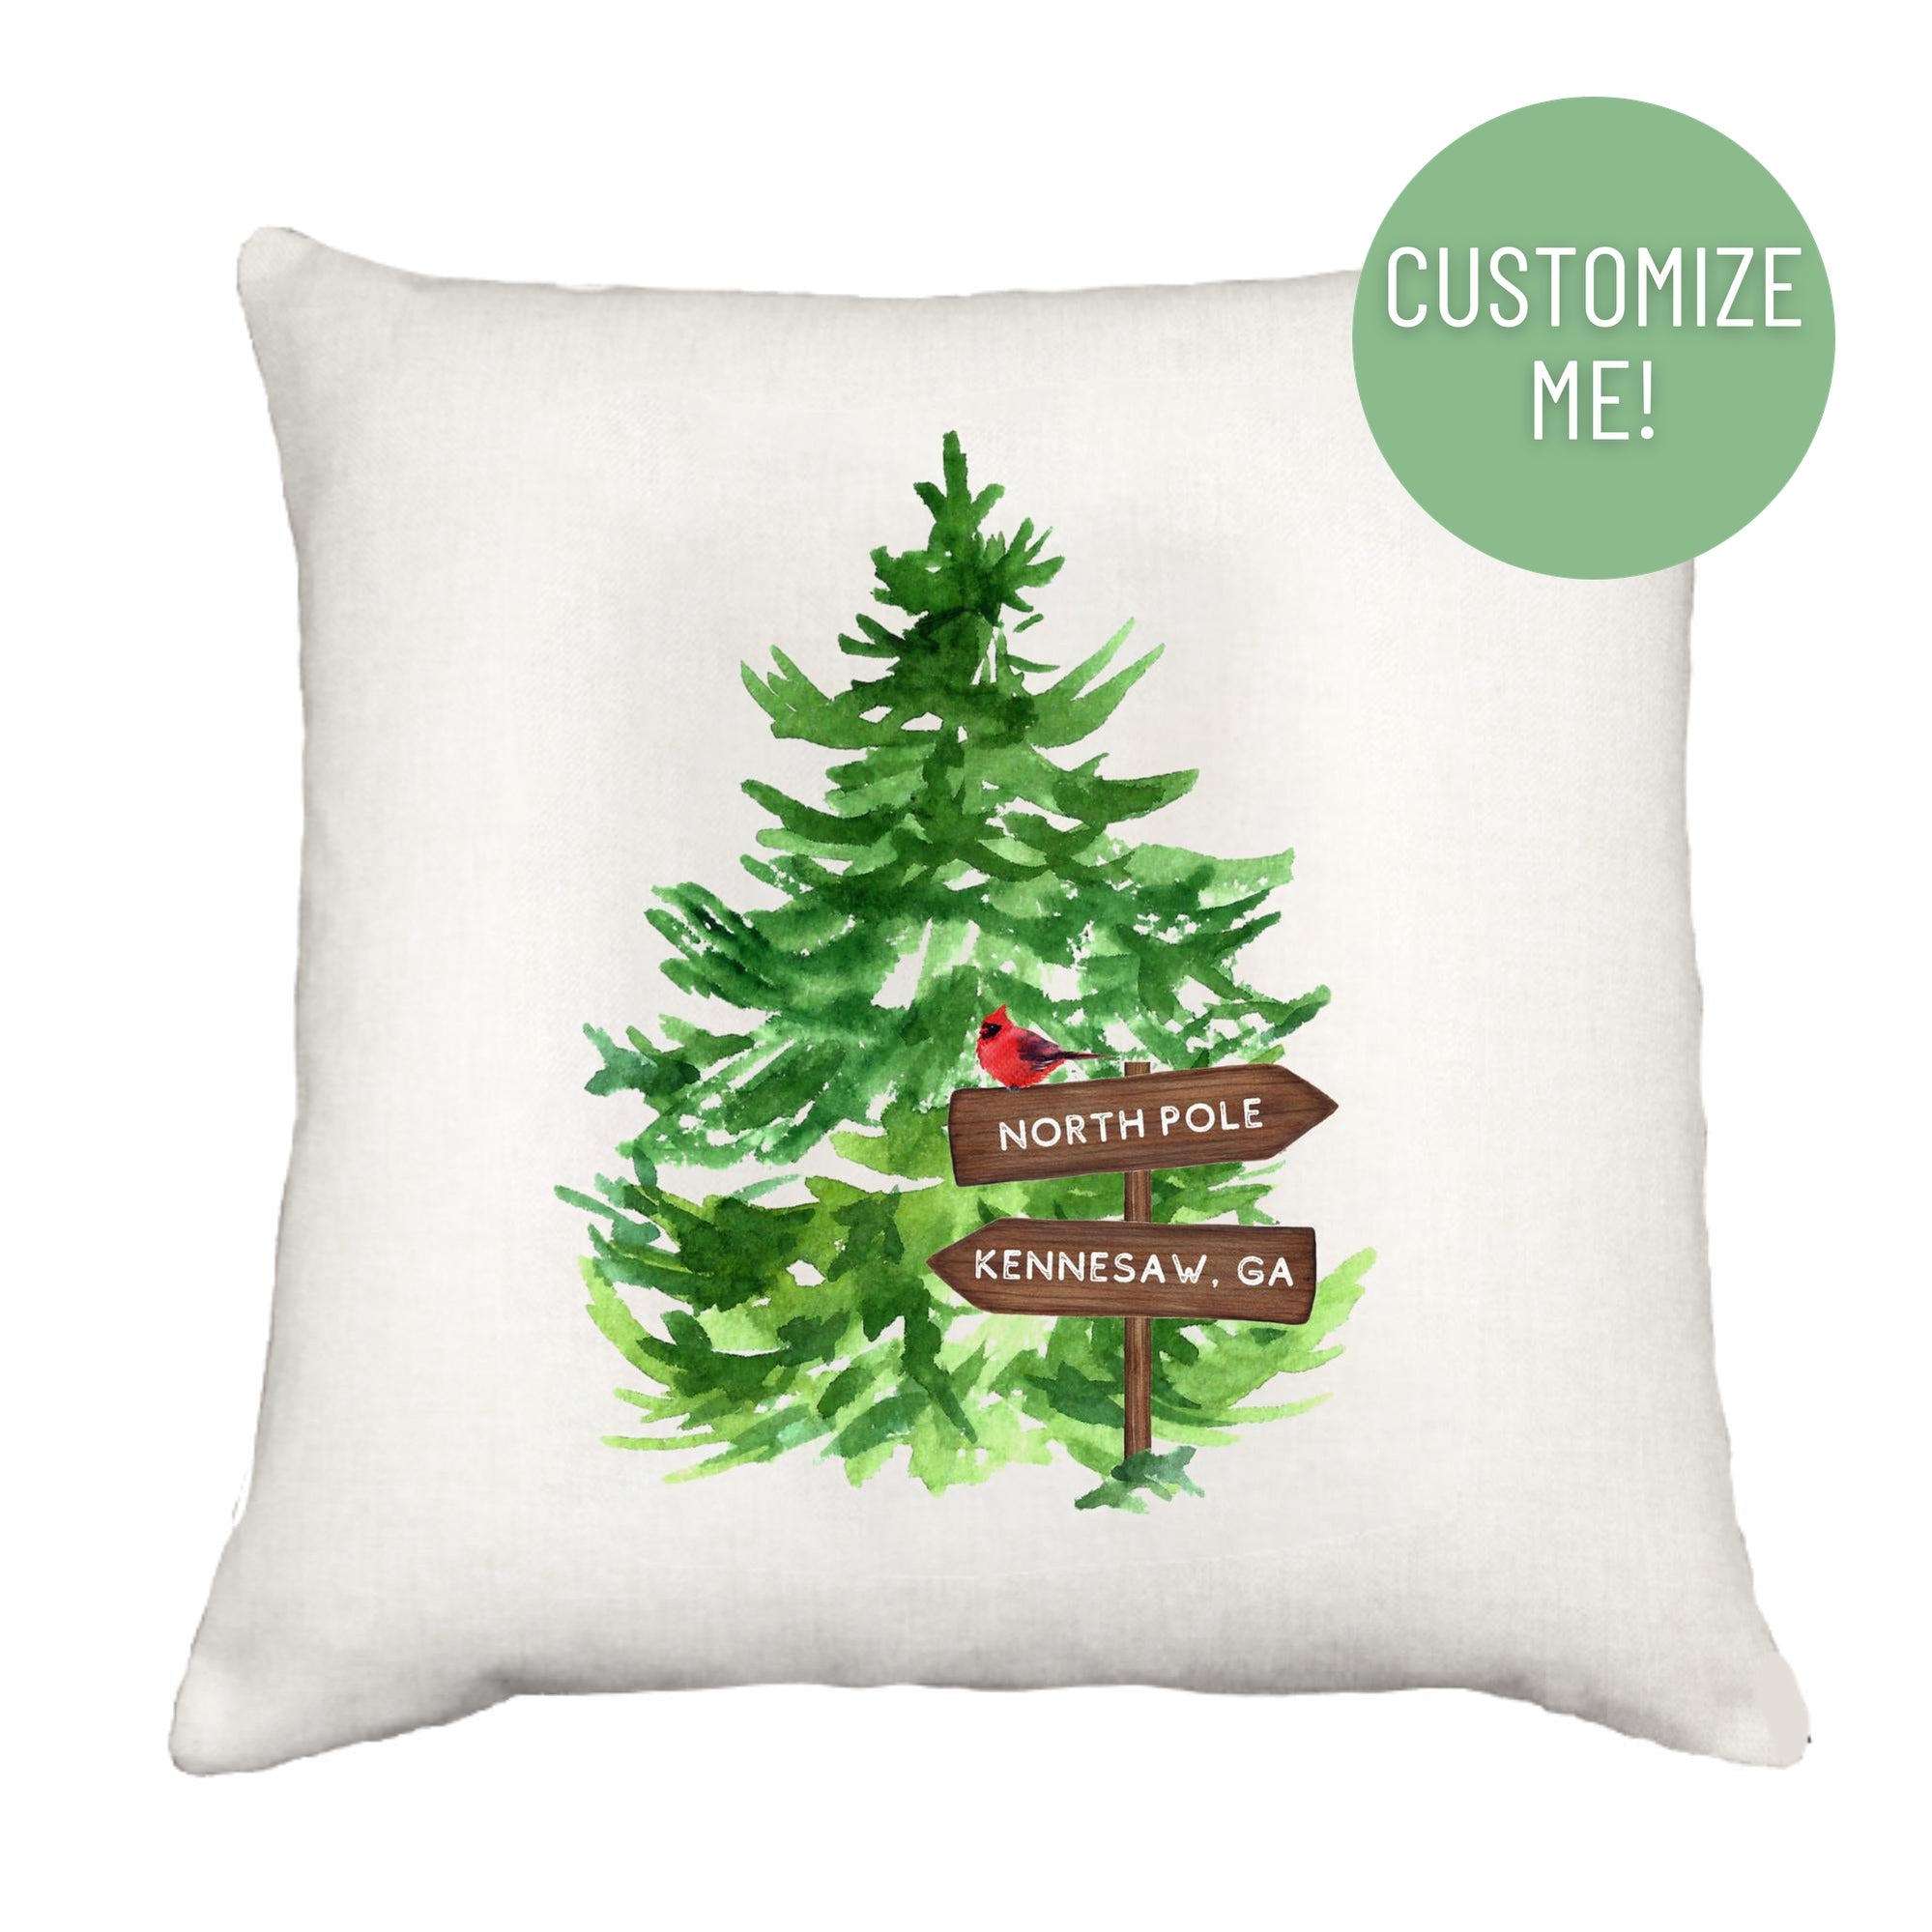 North Pole Directional Sign Down Pillow